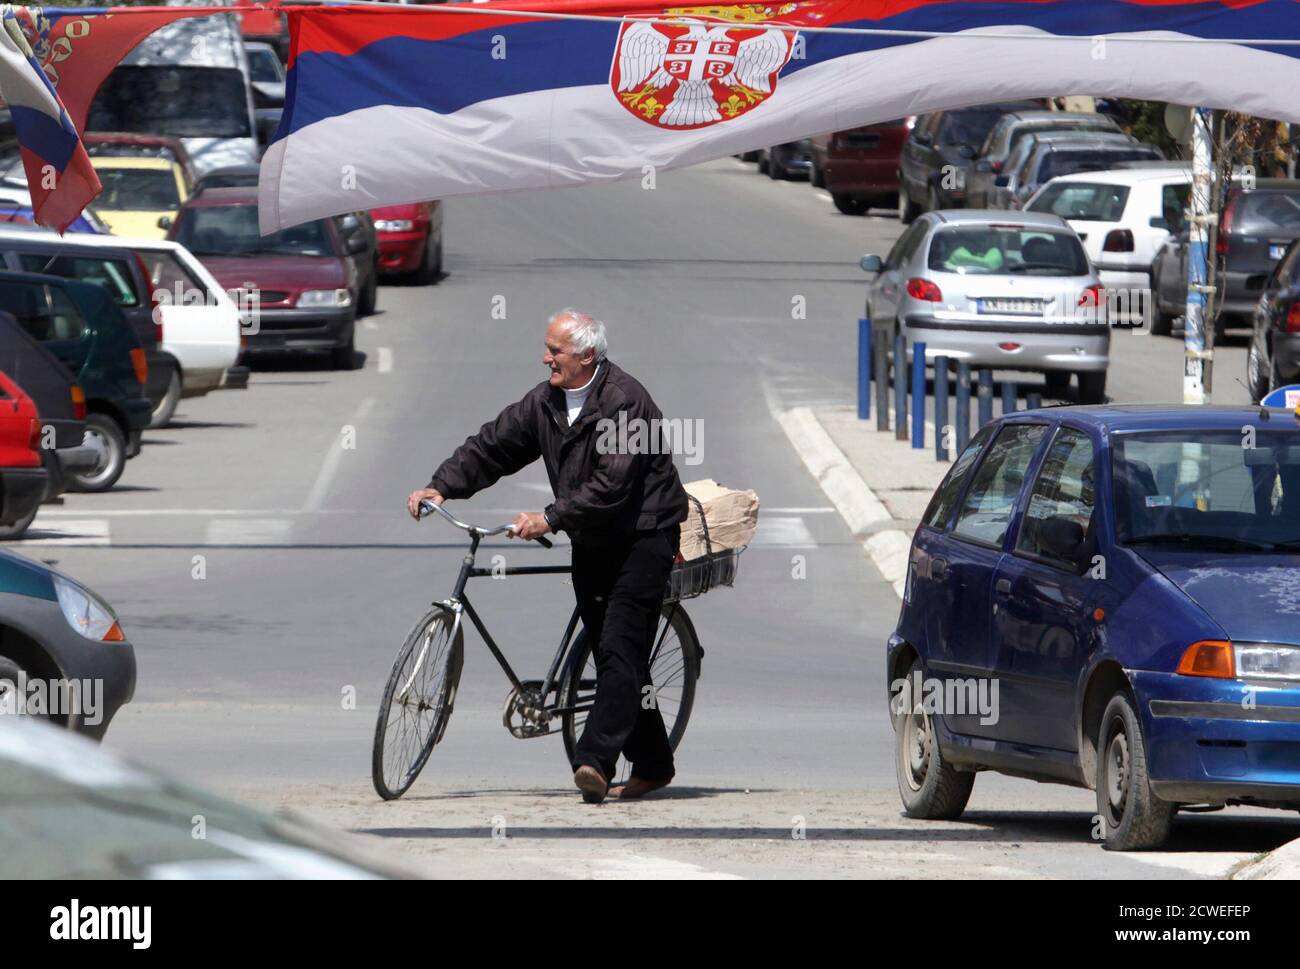 A man passes near Serbian flags in northern part of the ethnically divided  town of Mitrovica April 17, 2013. The European Union gave Serbia a last  chance to clinch membership talks with